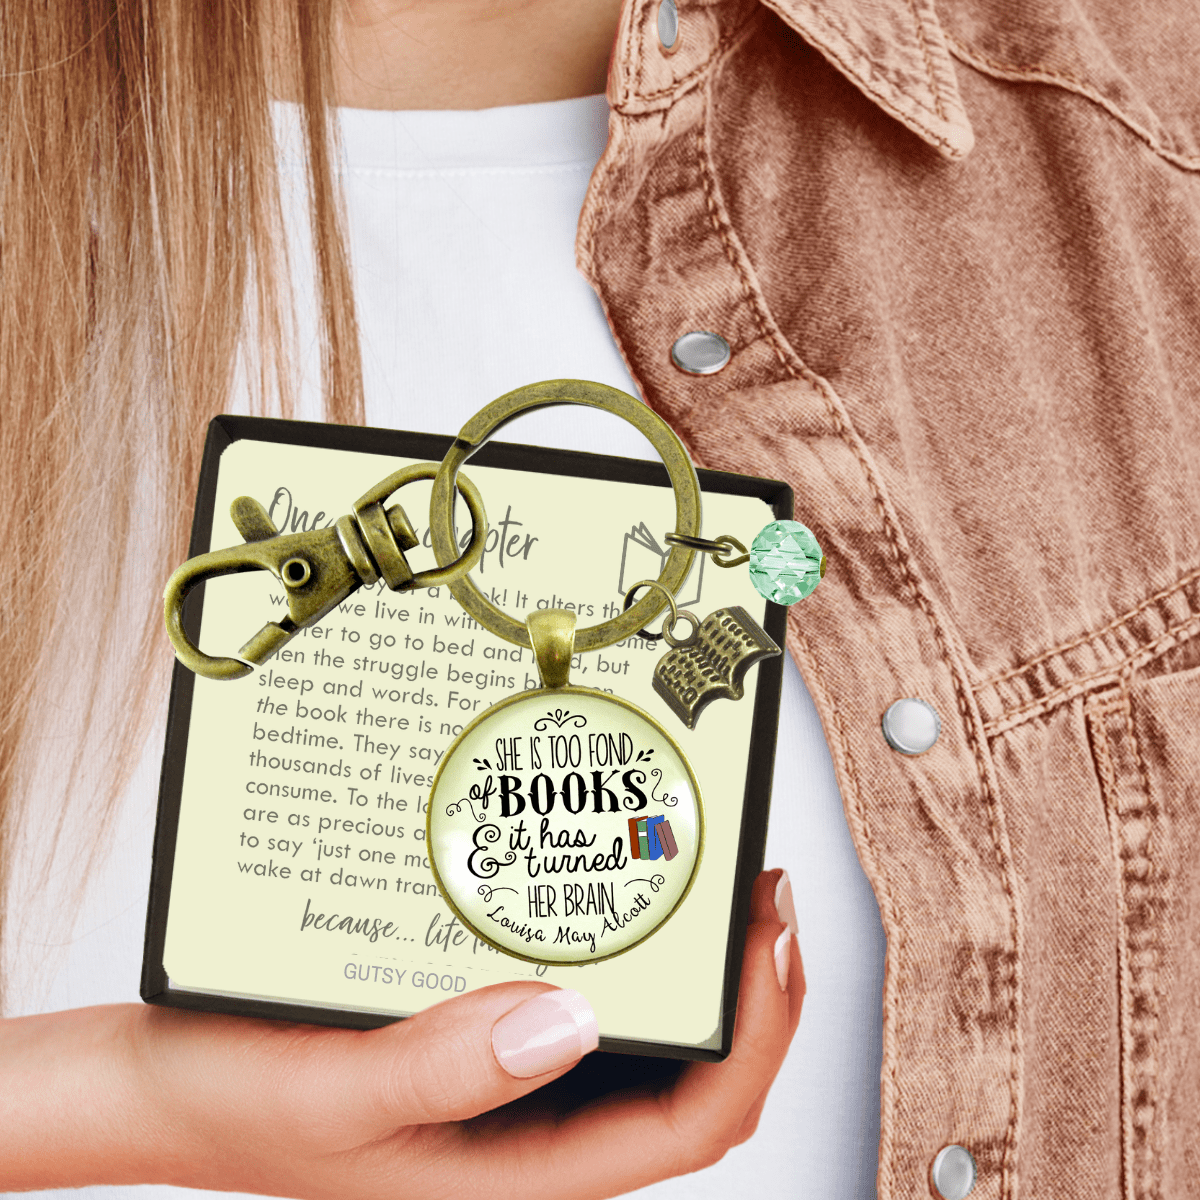 Book Keychain She Is Too Fond Literary Quote Louisa May Alcott Reader Inspired Jewelry Green - Gutsy Goodness;Book Keychain She Is Too Fond Literary Quote Louisa May Alcott Reader Inspired Jewelry Green - Gutsy Goodness Handmade Jewelry Gifts